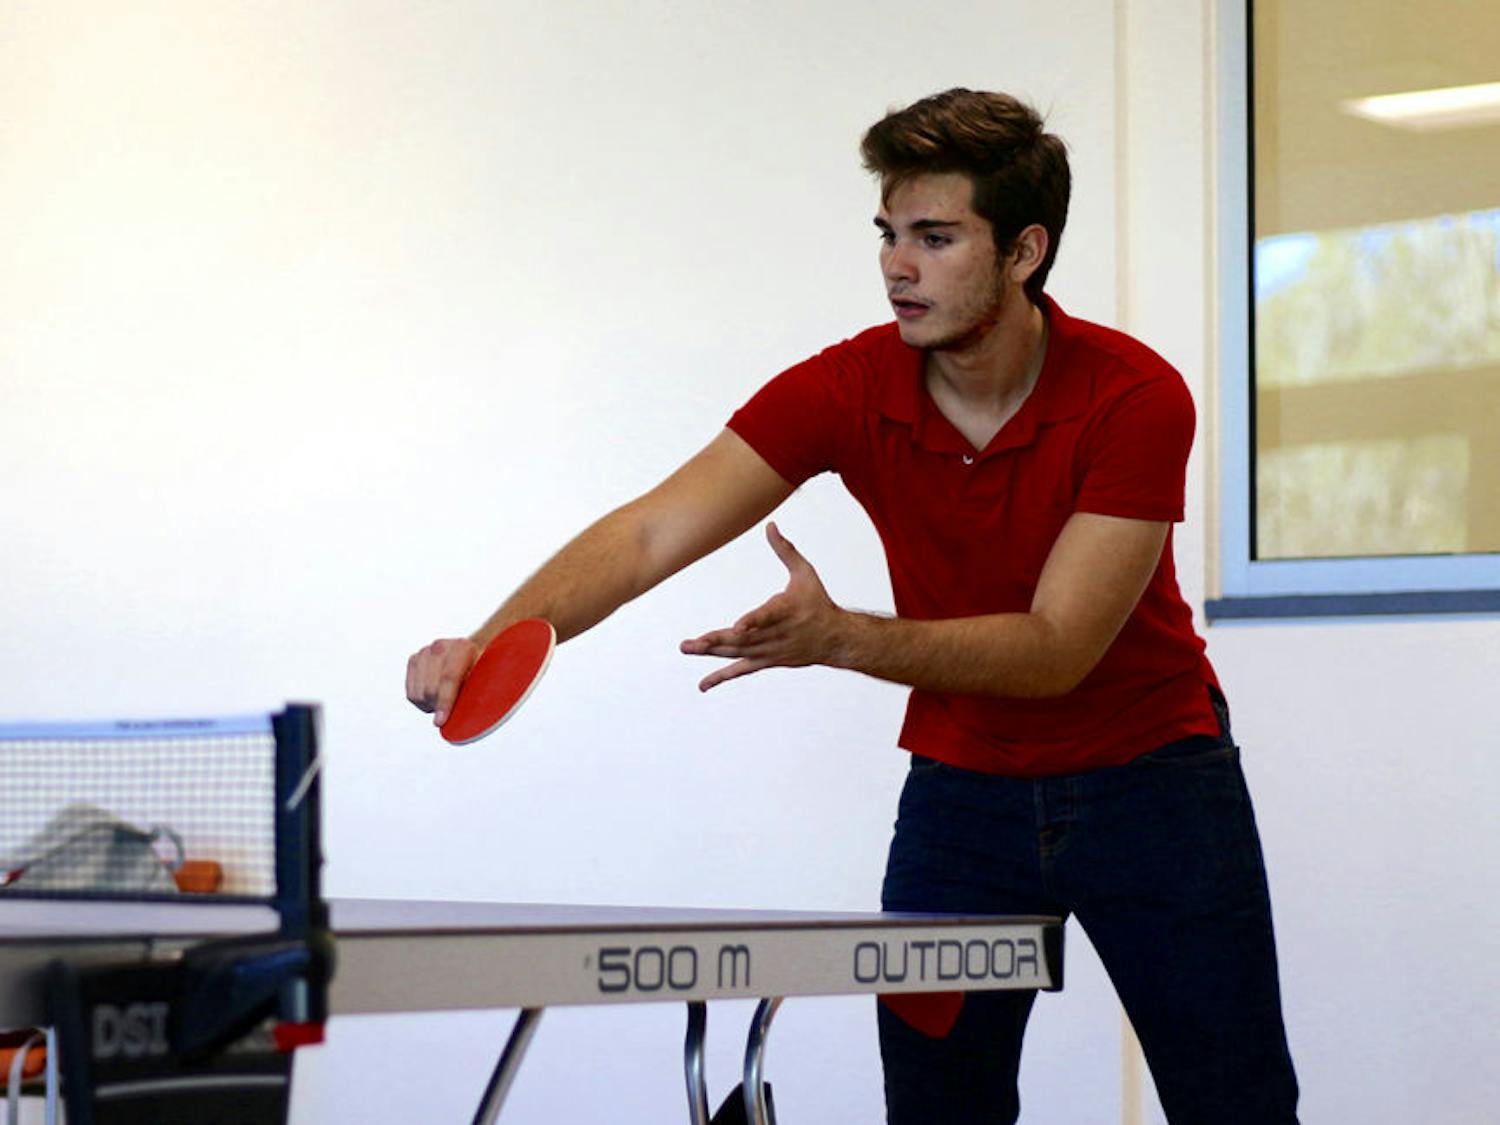 Esteban Siles, an 18-year-old industrial engineering freshman, plays a game of table tennis with his friend Carlos Ancaten in the recently opened Reitz Union Game Room on Tuesday afternoon.